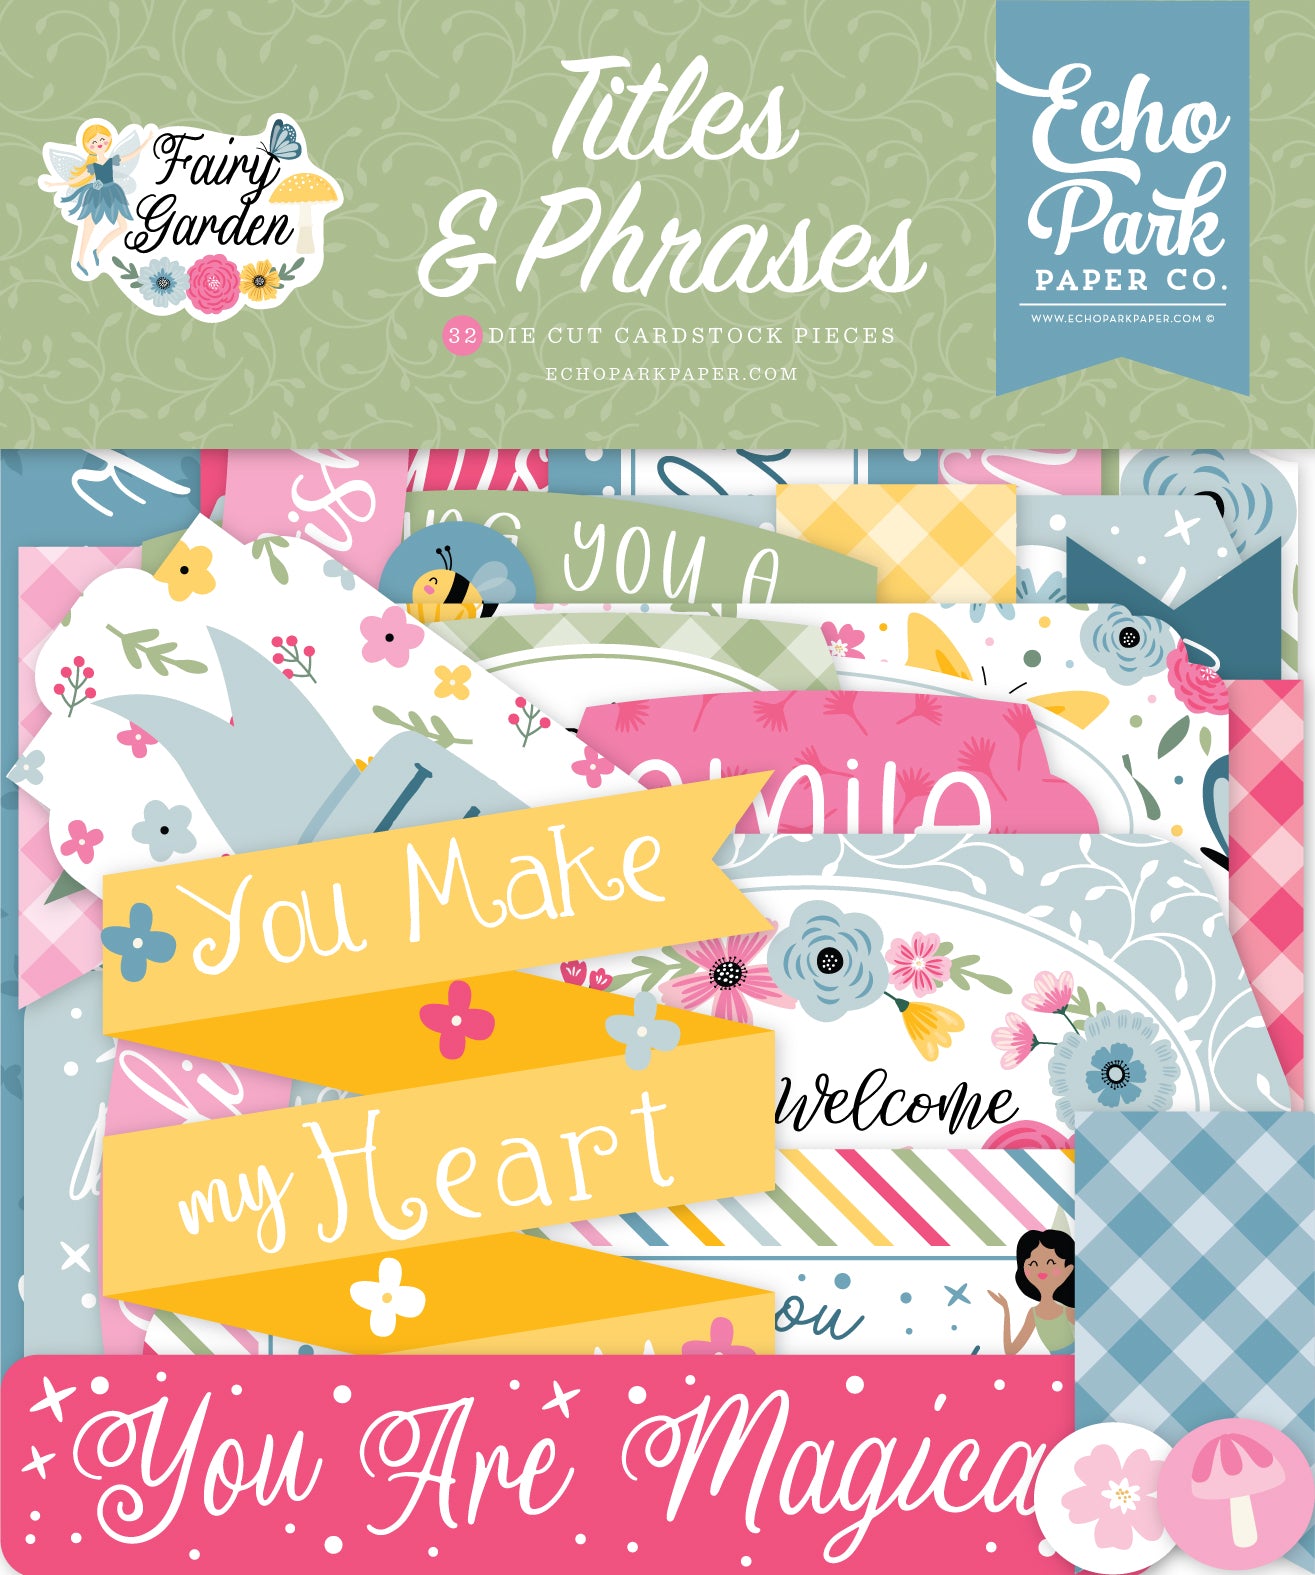 Fairy Garden Collection 5 x 5 Scrapbook Titles & Phrases by Echo Park Paper